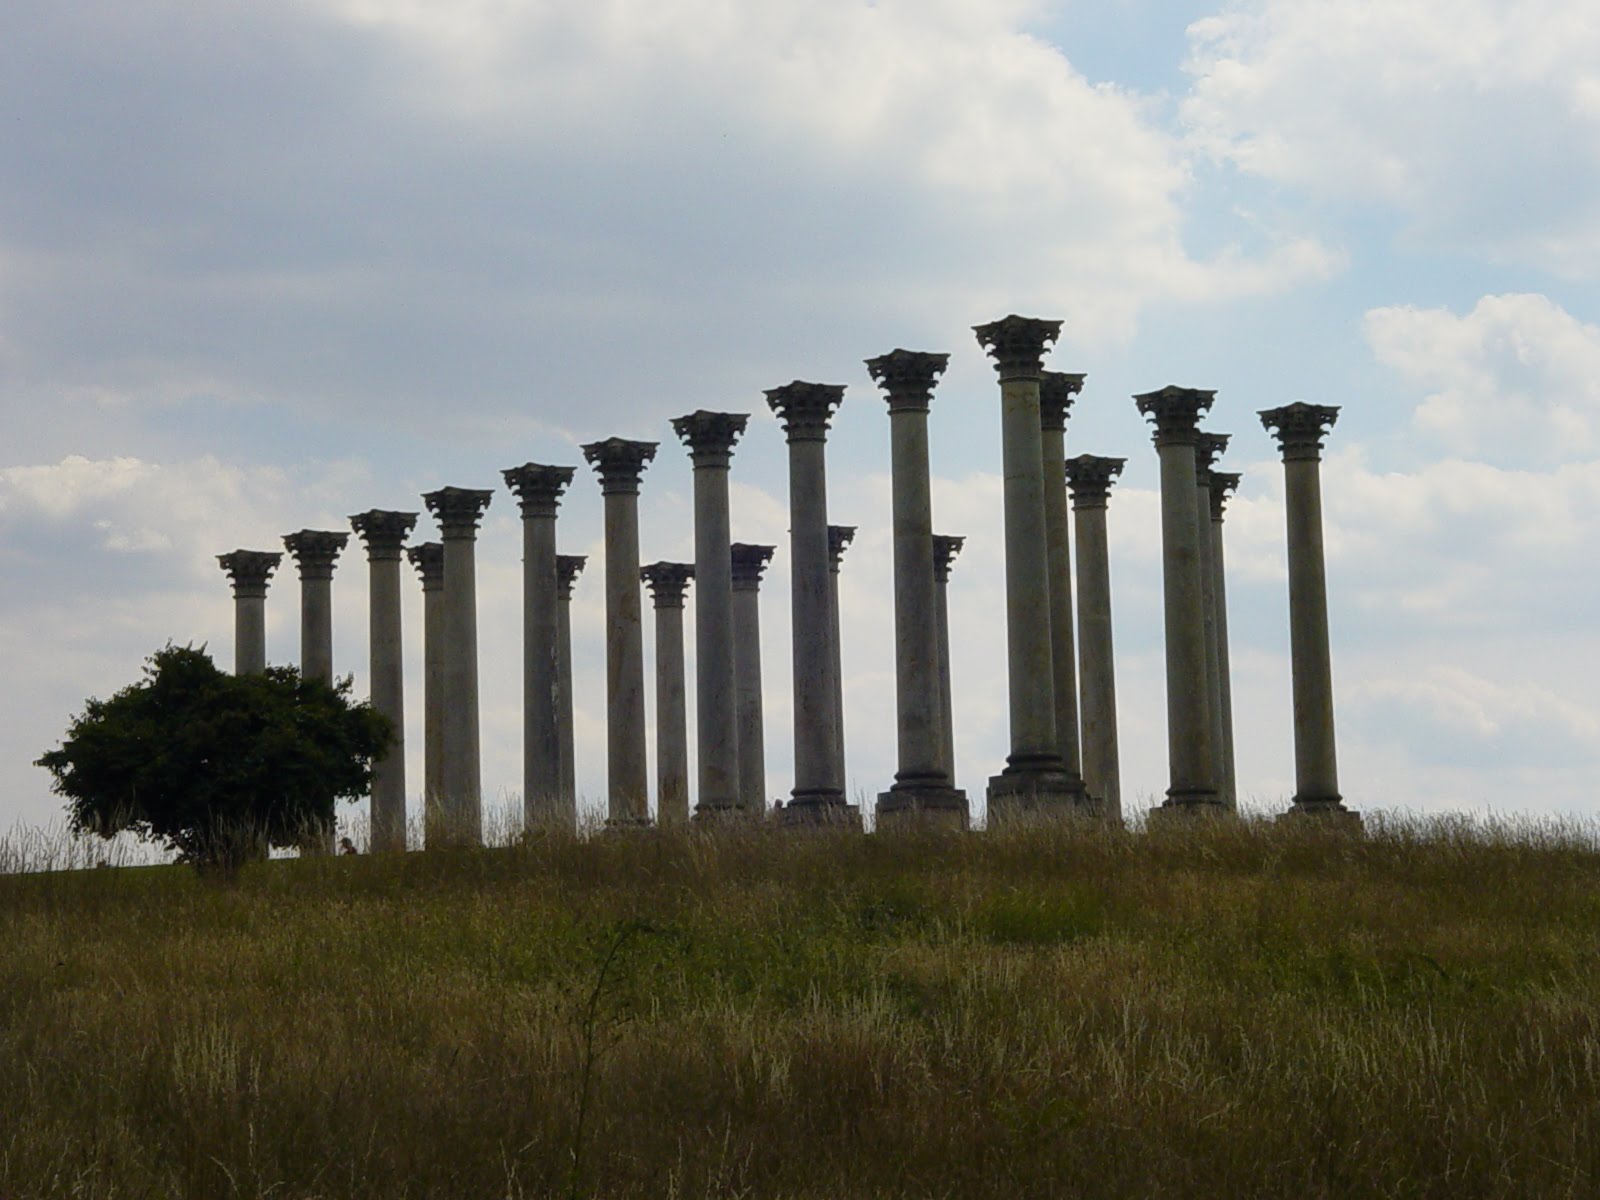 Twenty-two corinthian columns arranged in a rectangle in a field, supporting nothing.